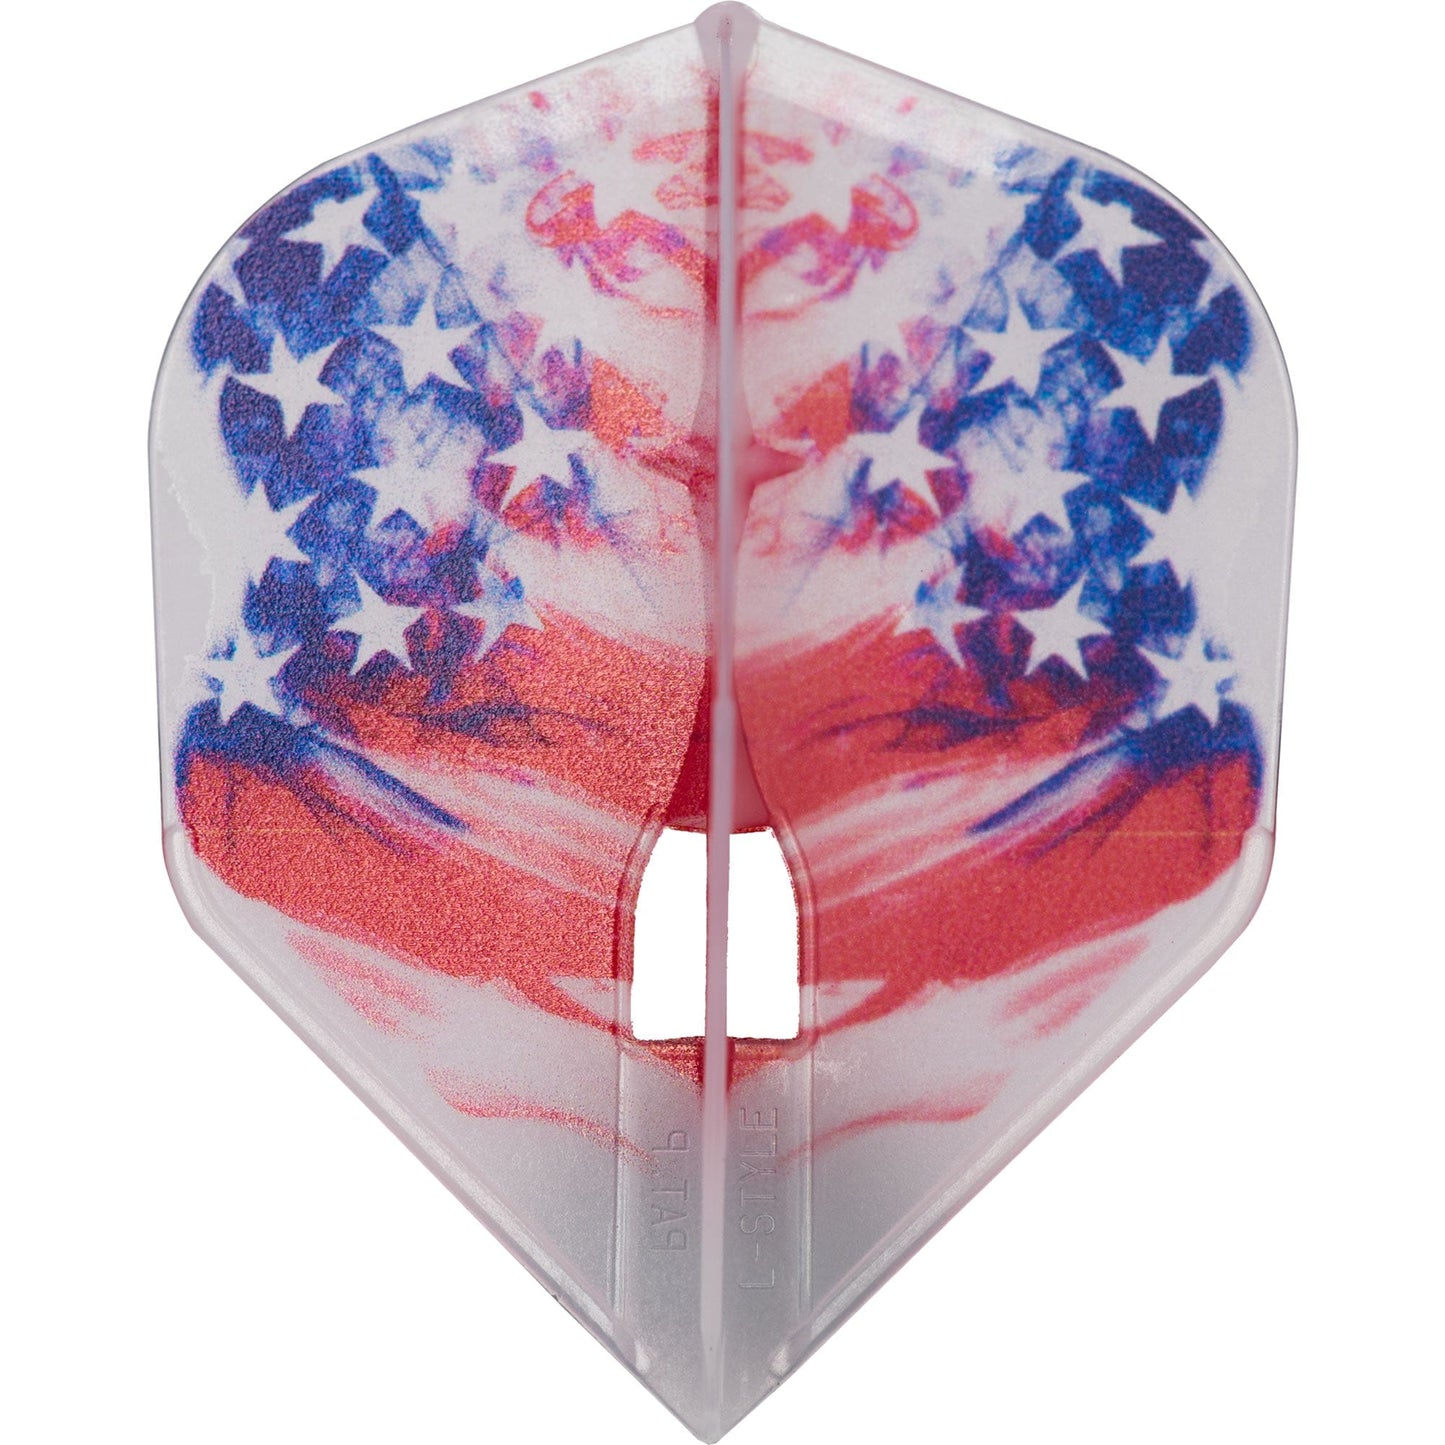 L-Style - L-Flights - L3 Pro - Champagne Ring - Shape - American Flag v3 - Clear White